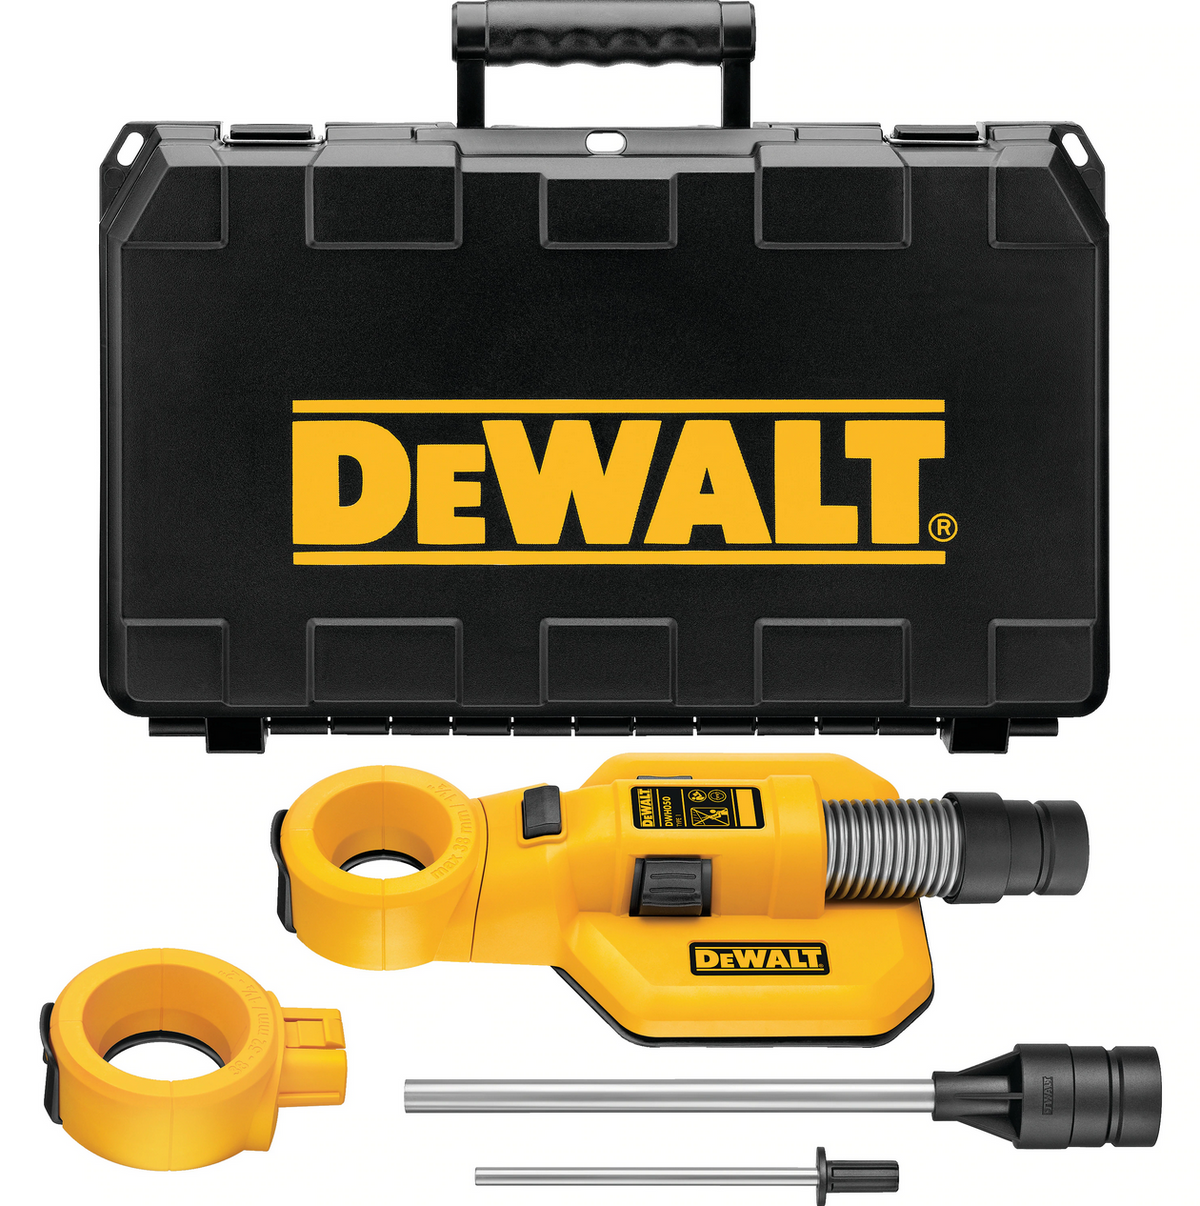 Dewalt® Large Hammer Dust Extraction Hole Cleaning DWH050K — Cougar Sales   Rental, Inc.